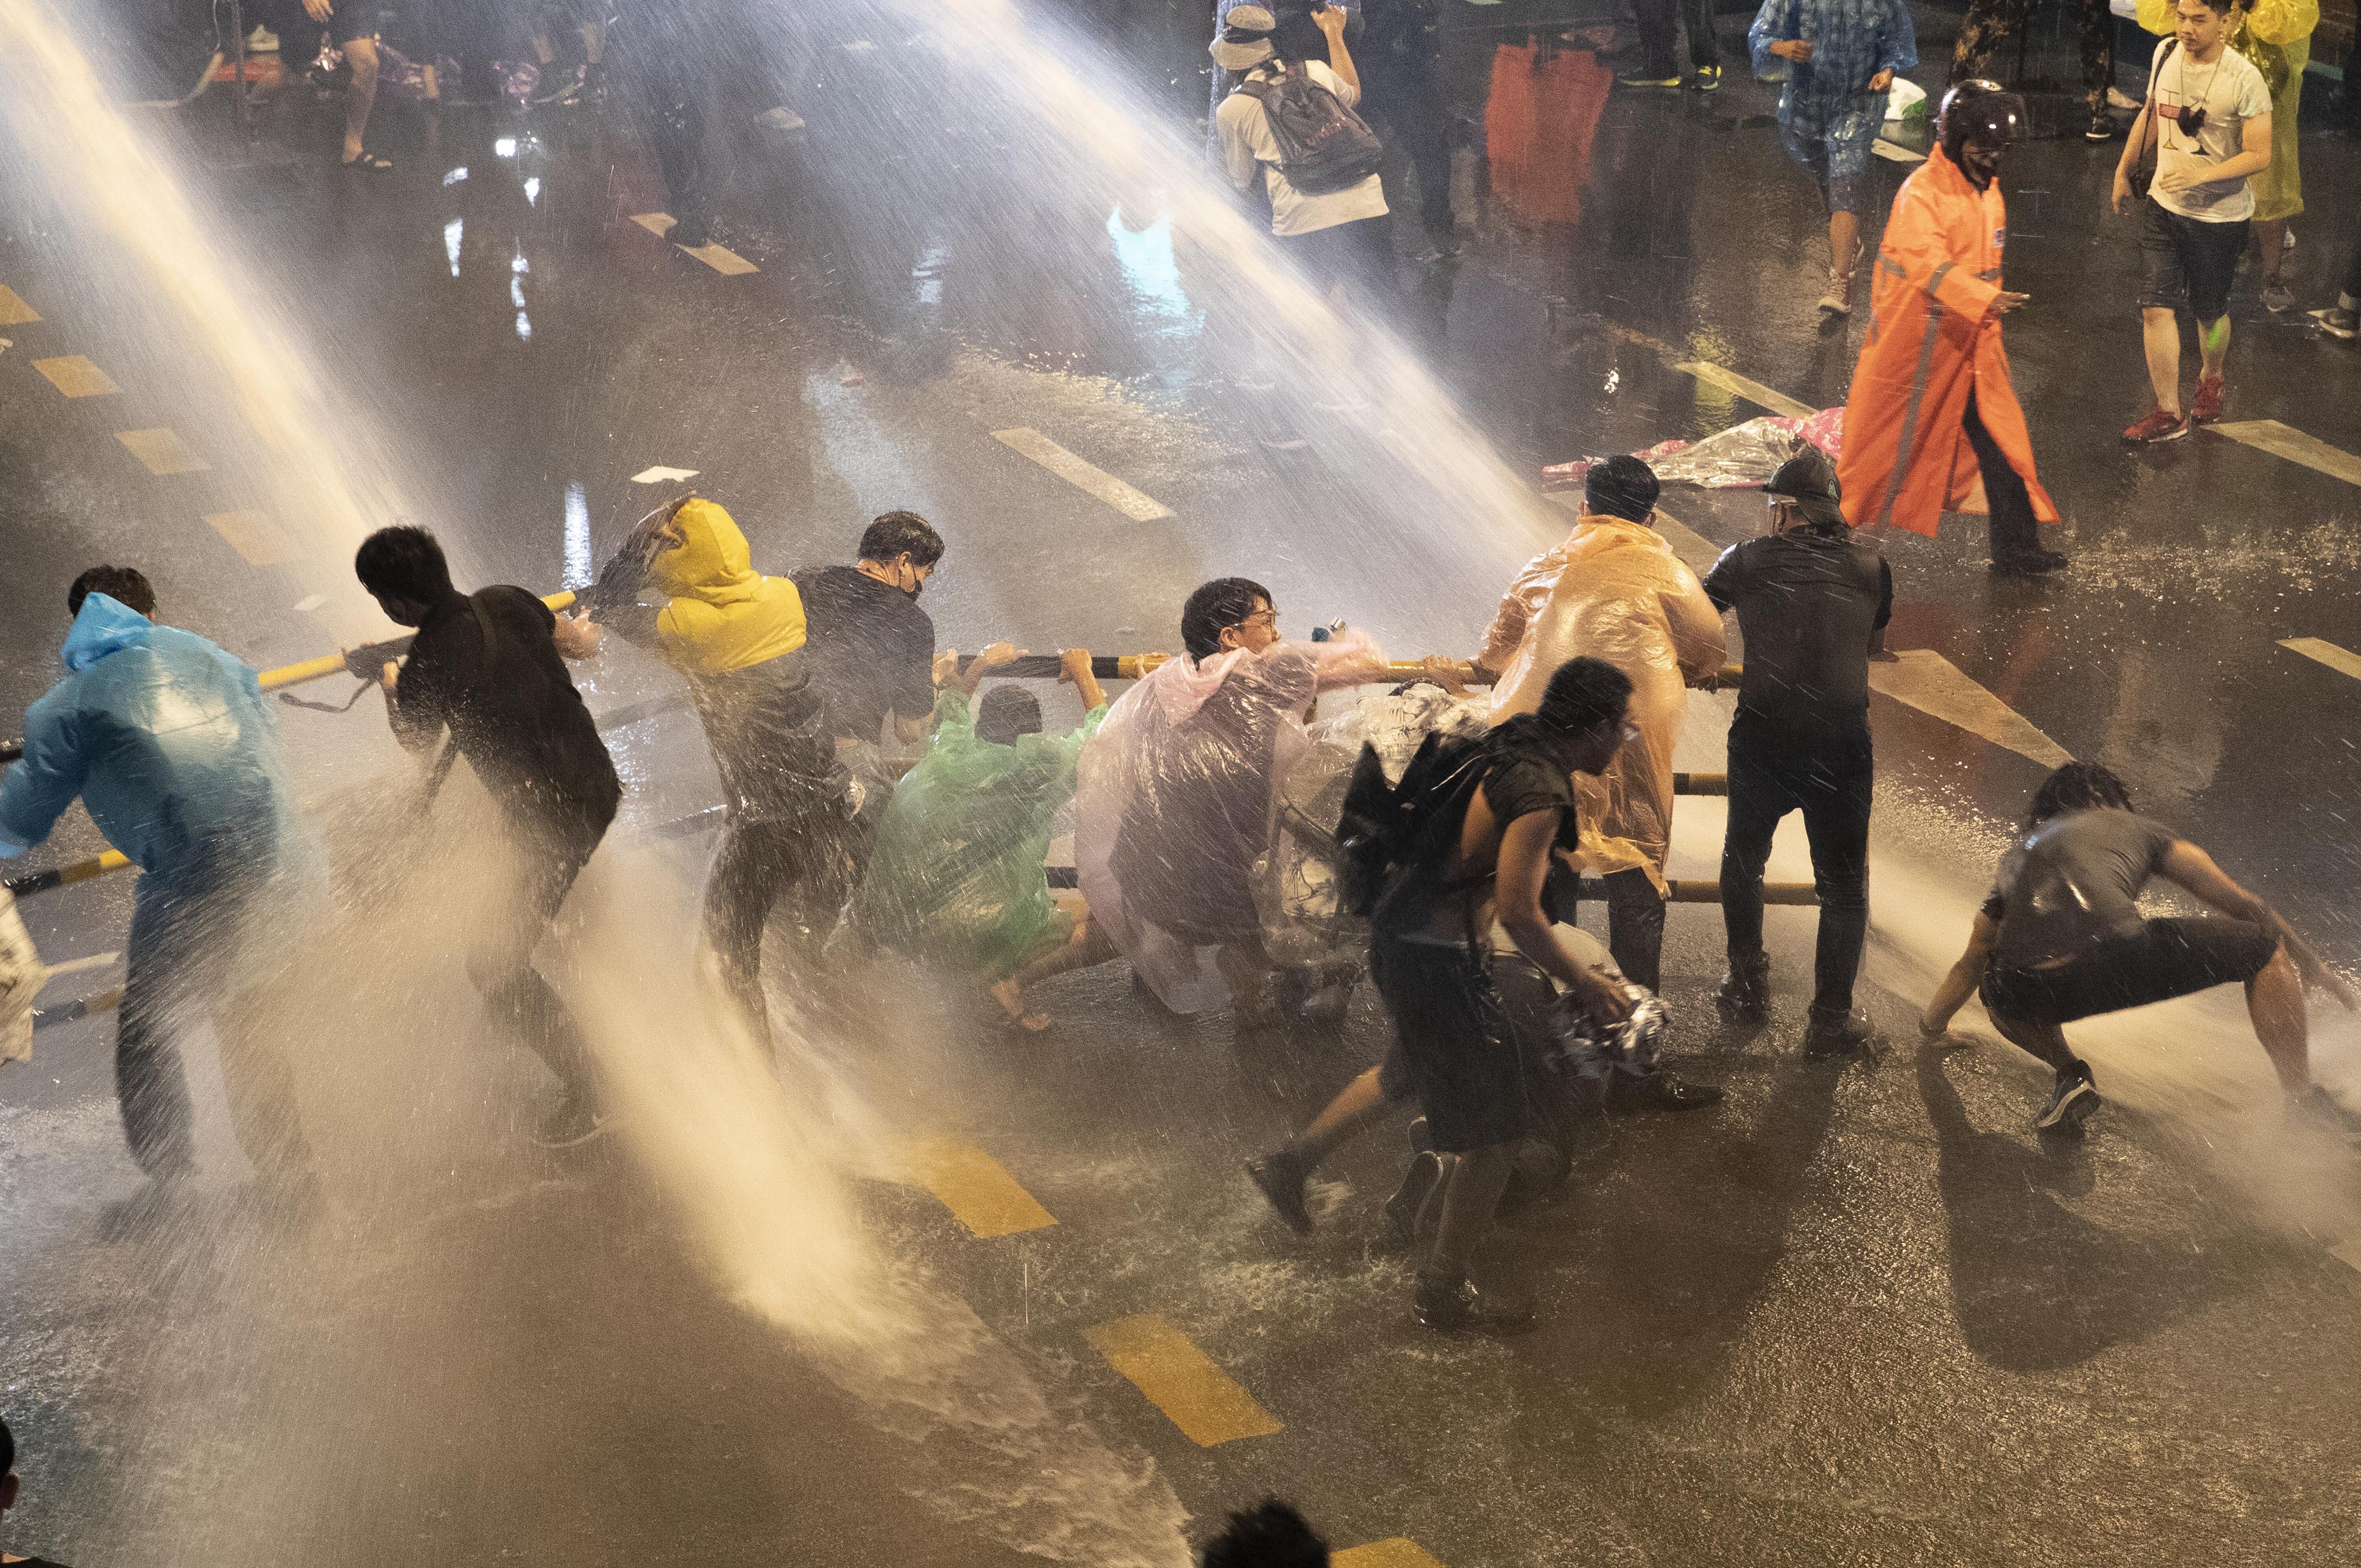 Demonstrators face water canons as police try to disperse them from their protest venue in Bangkok on Friday. Photo: AP